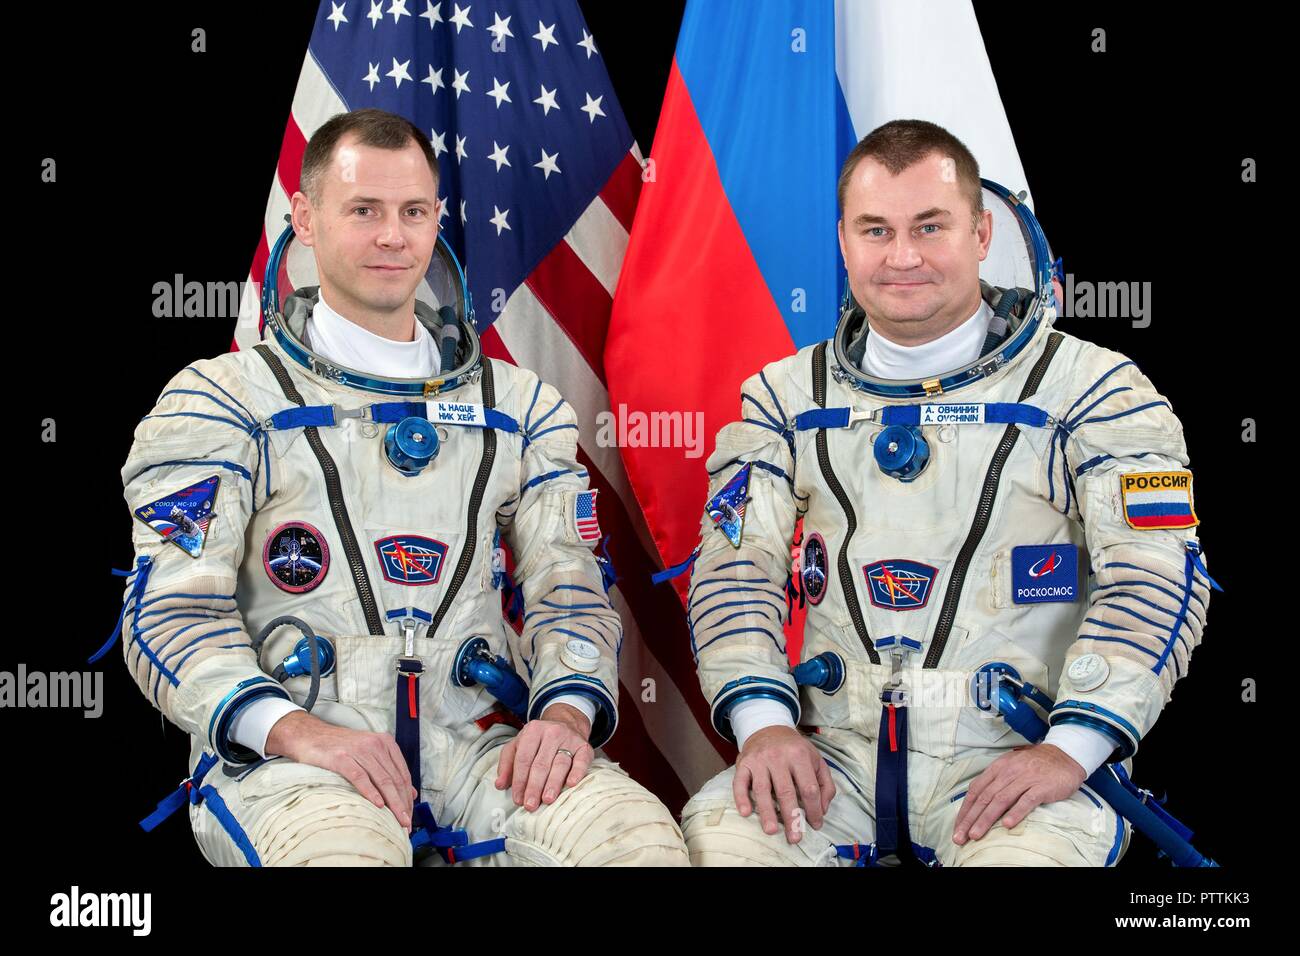 Expedition 57 crew member cosmonaut Alexey Ovchinin of Roscosmos, right, and Nick Hague of NASA portraits in their Sokol launch and entry suits at the Gagarin Cosmonaut Training Center November 16, 2017 in Star City, Russia. International Space Station Expedition 57 crew Nick Hague of NASA and Alexey Ovchinin of Roscosmos are scheduled to launch on October 11th and will spend the next six months living and working aboard the International Space Station. Stock Photo